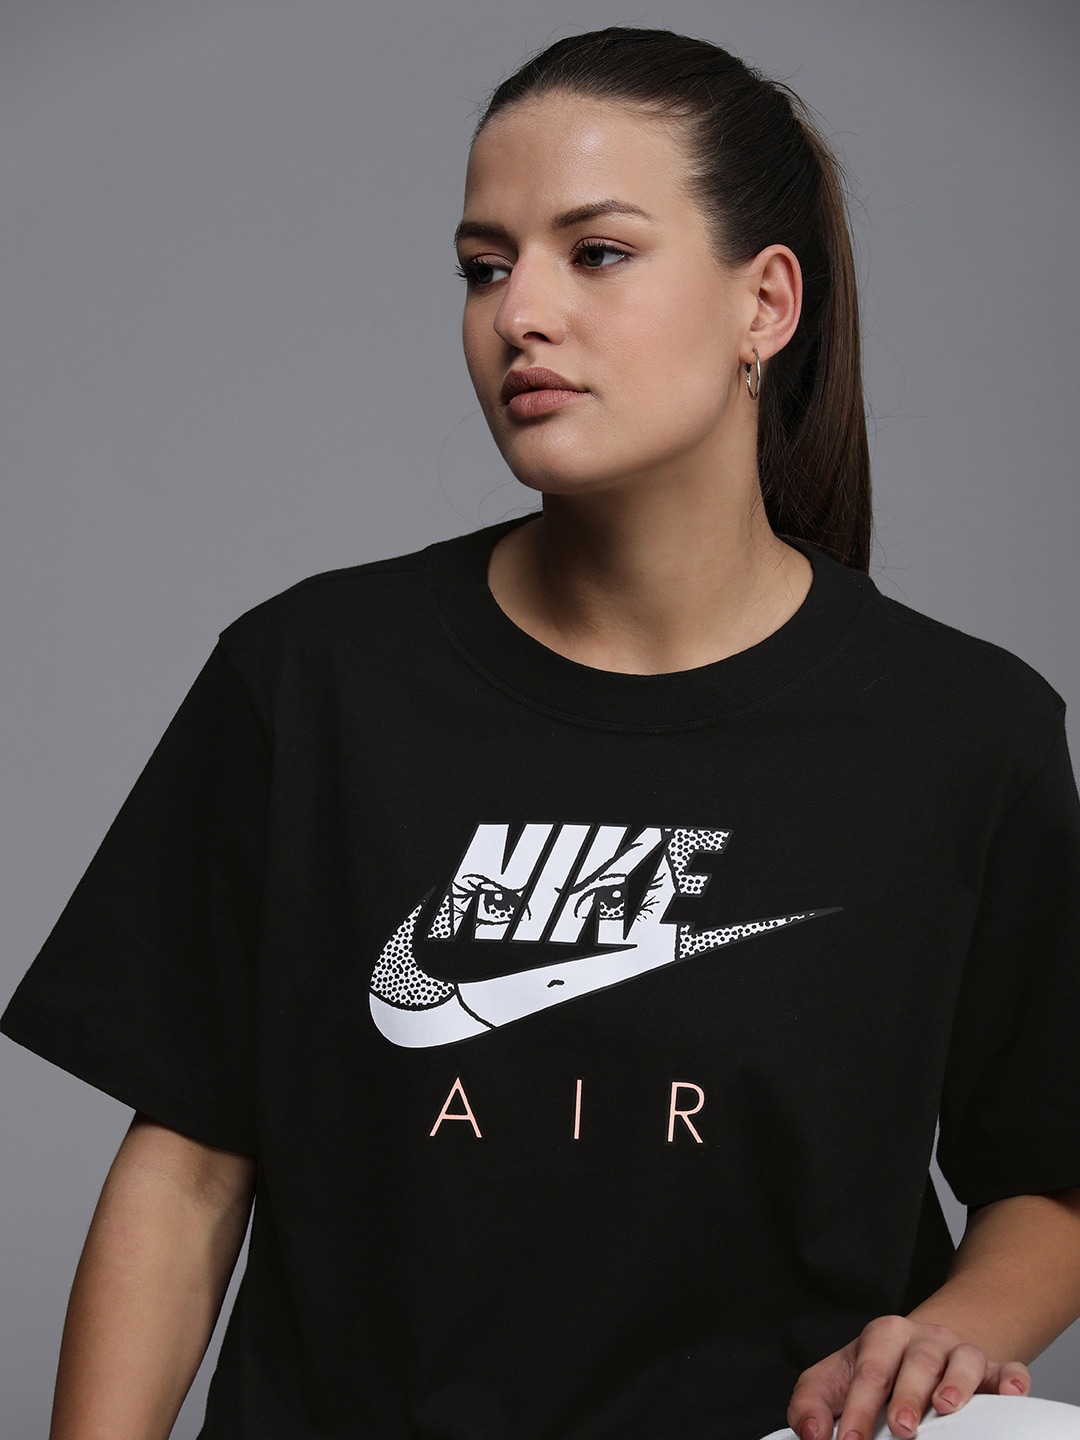 Nike Women Black & White Brand Logo Printed Pure Cotton Extended Sleeves Boxy T-shirt Price in India